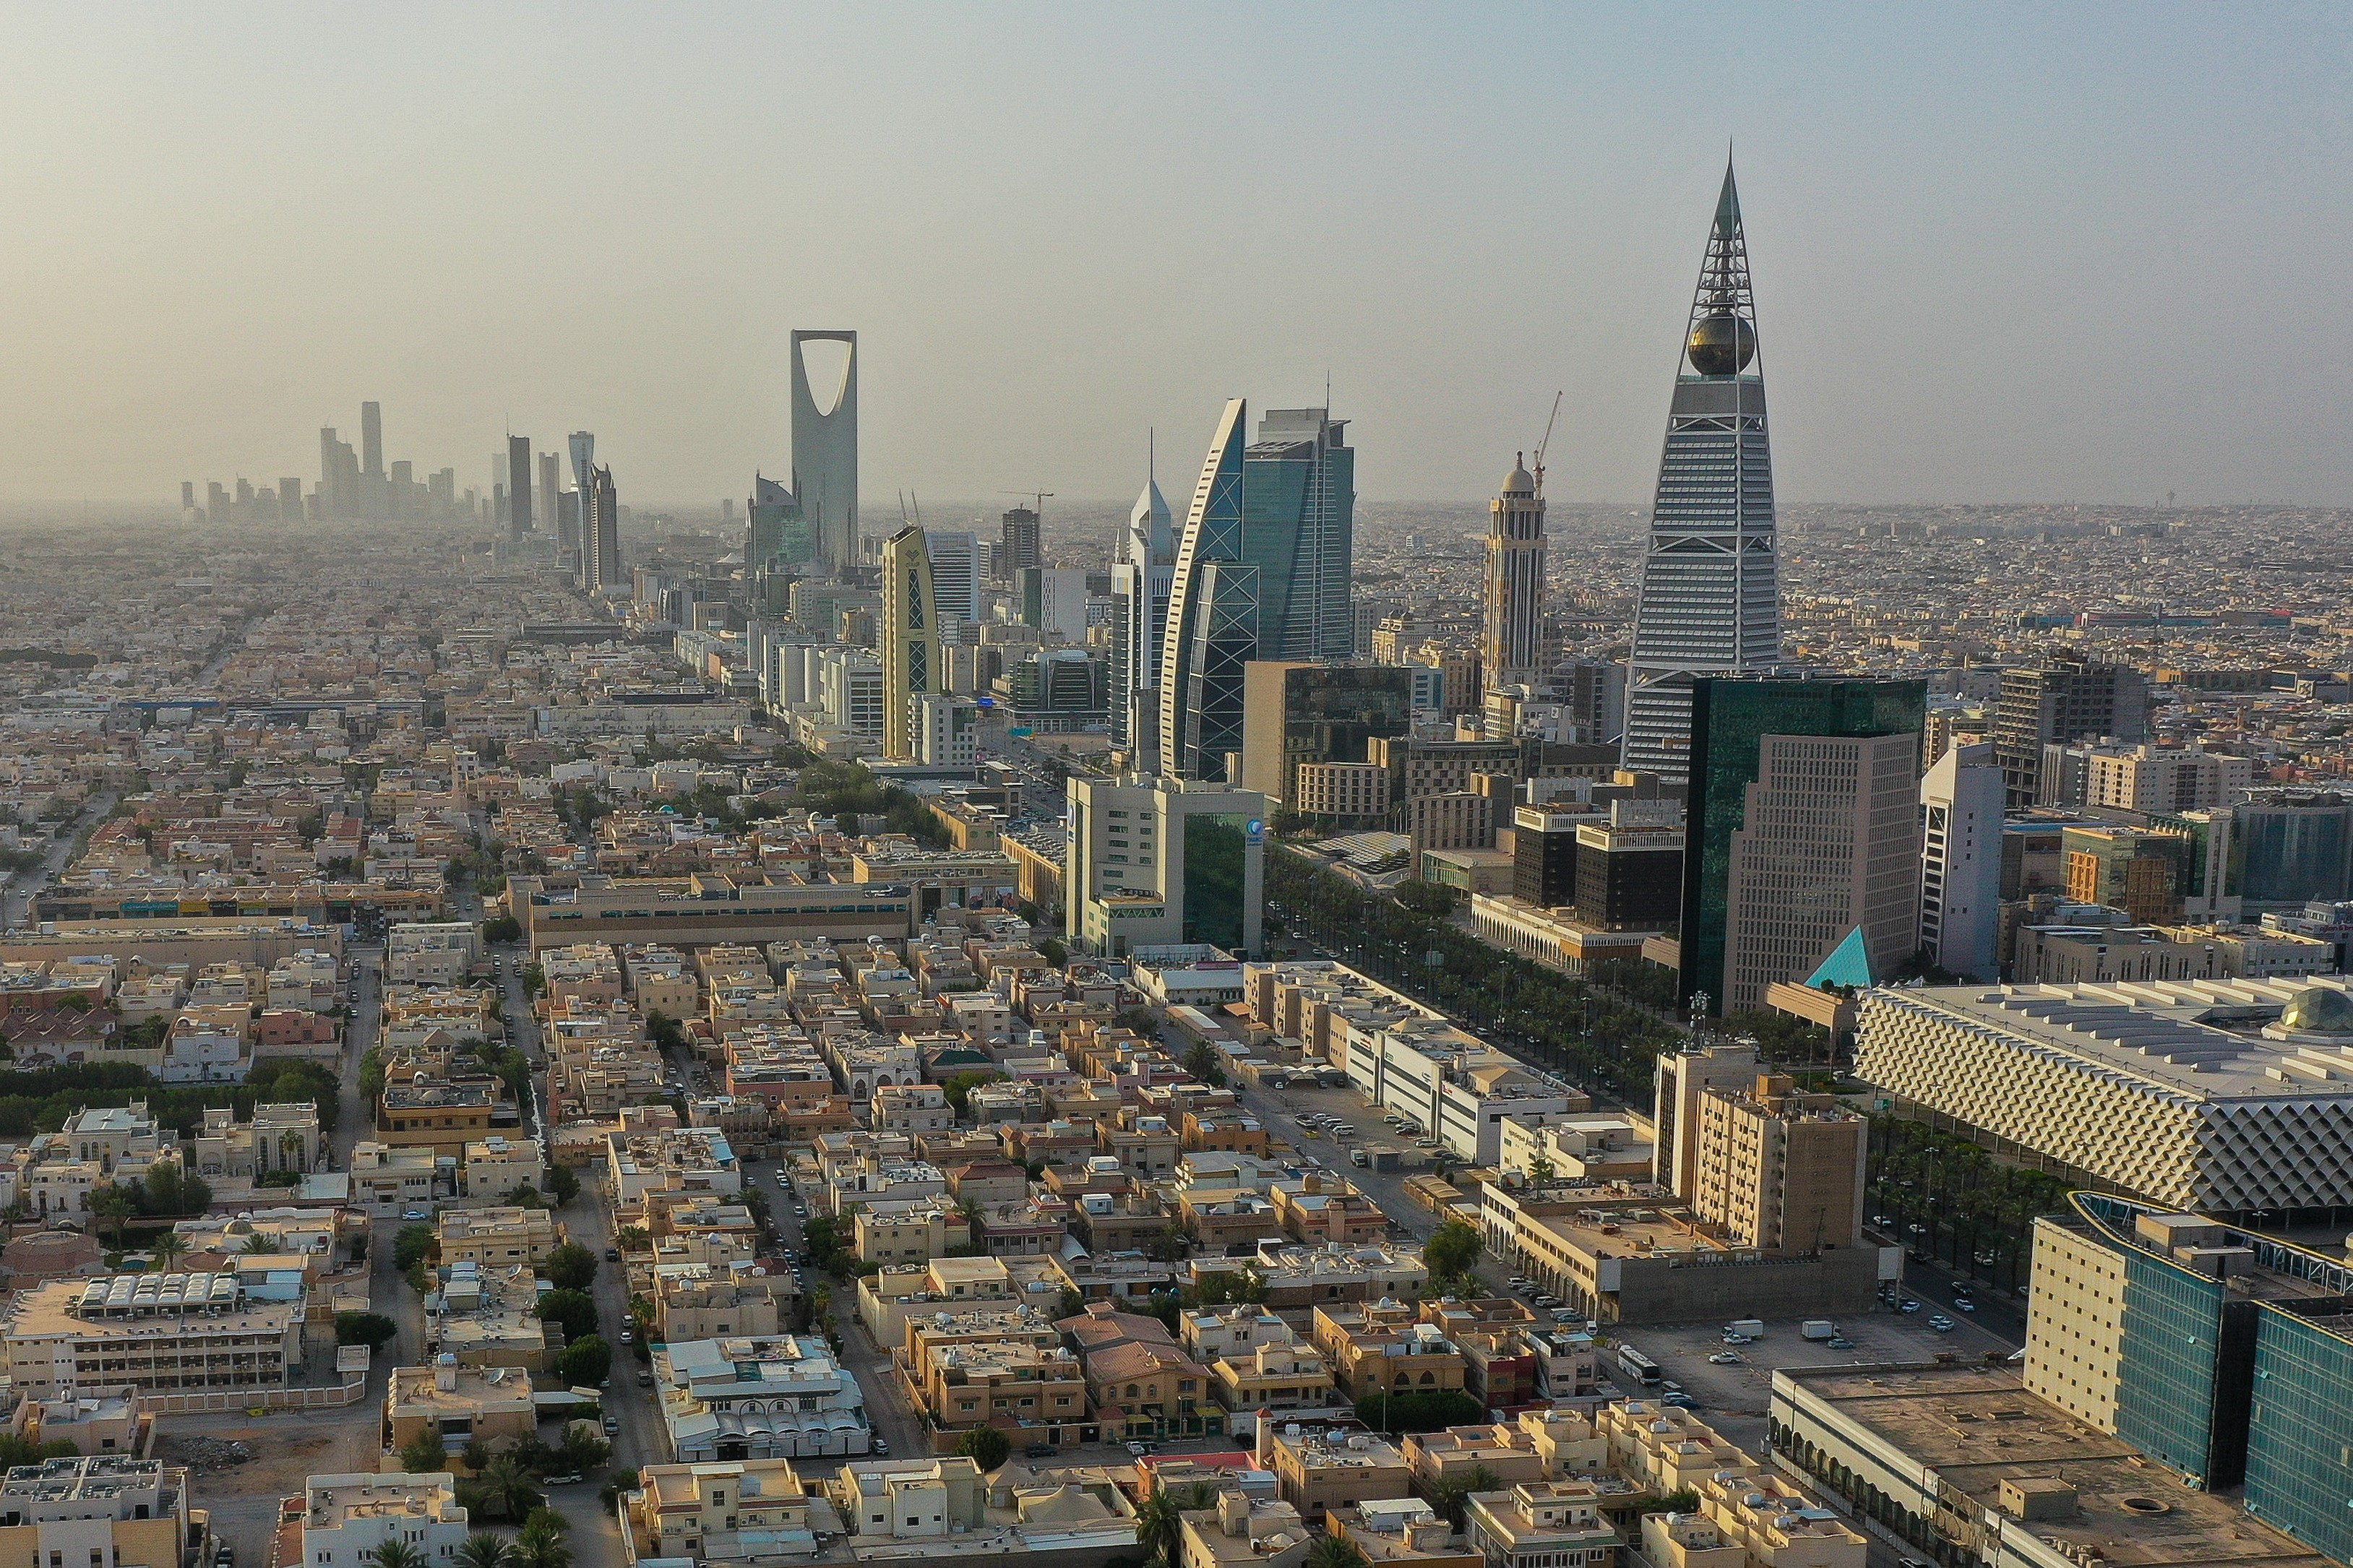 Ajlan & Bros, which is based in Riyadh (pictured), plays a crucial role in easing the entry of Chinese companies into Saudi Arabia. Photo: Shutterstock